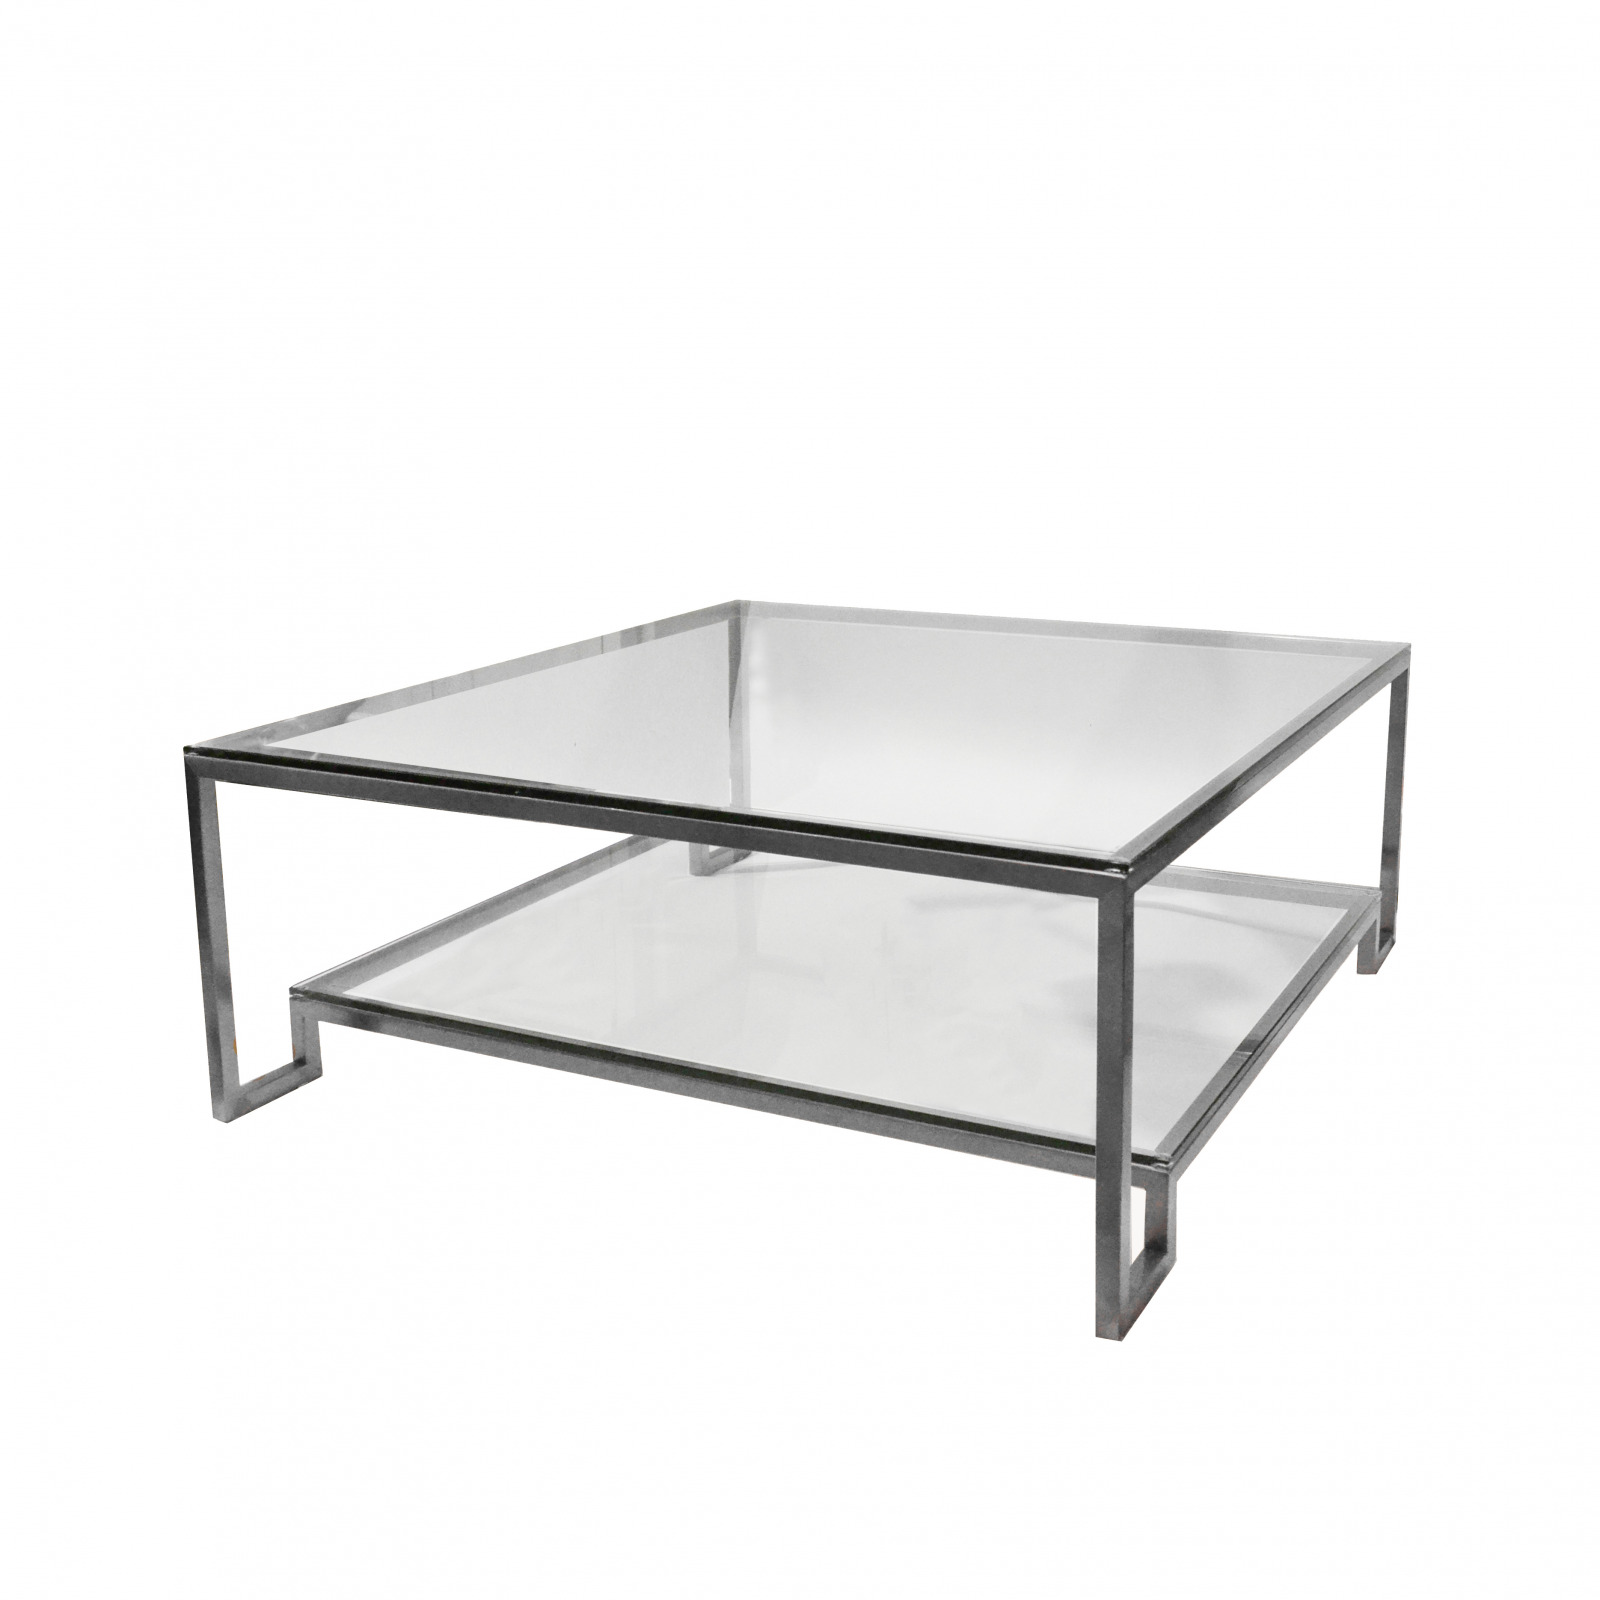 Ming silver coffee table